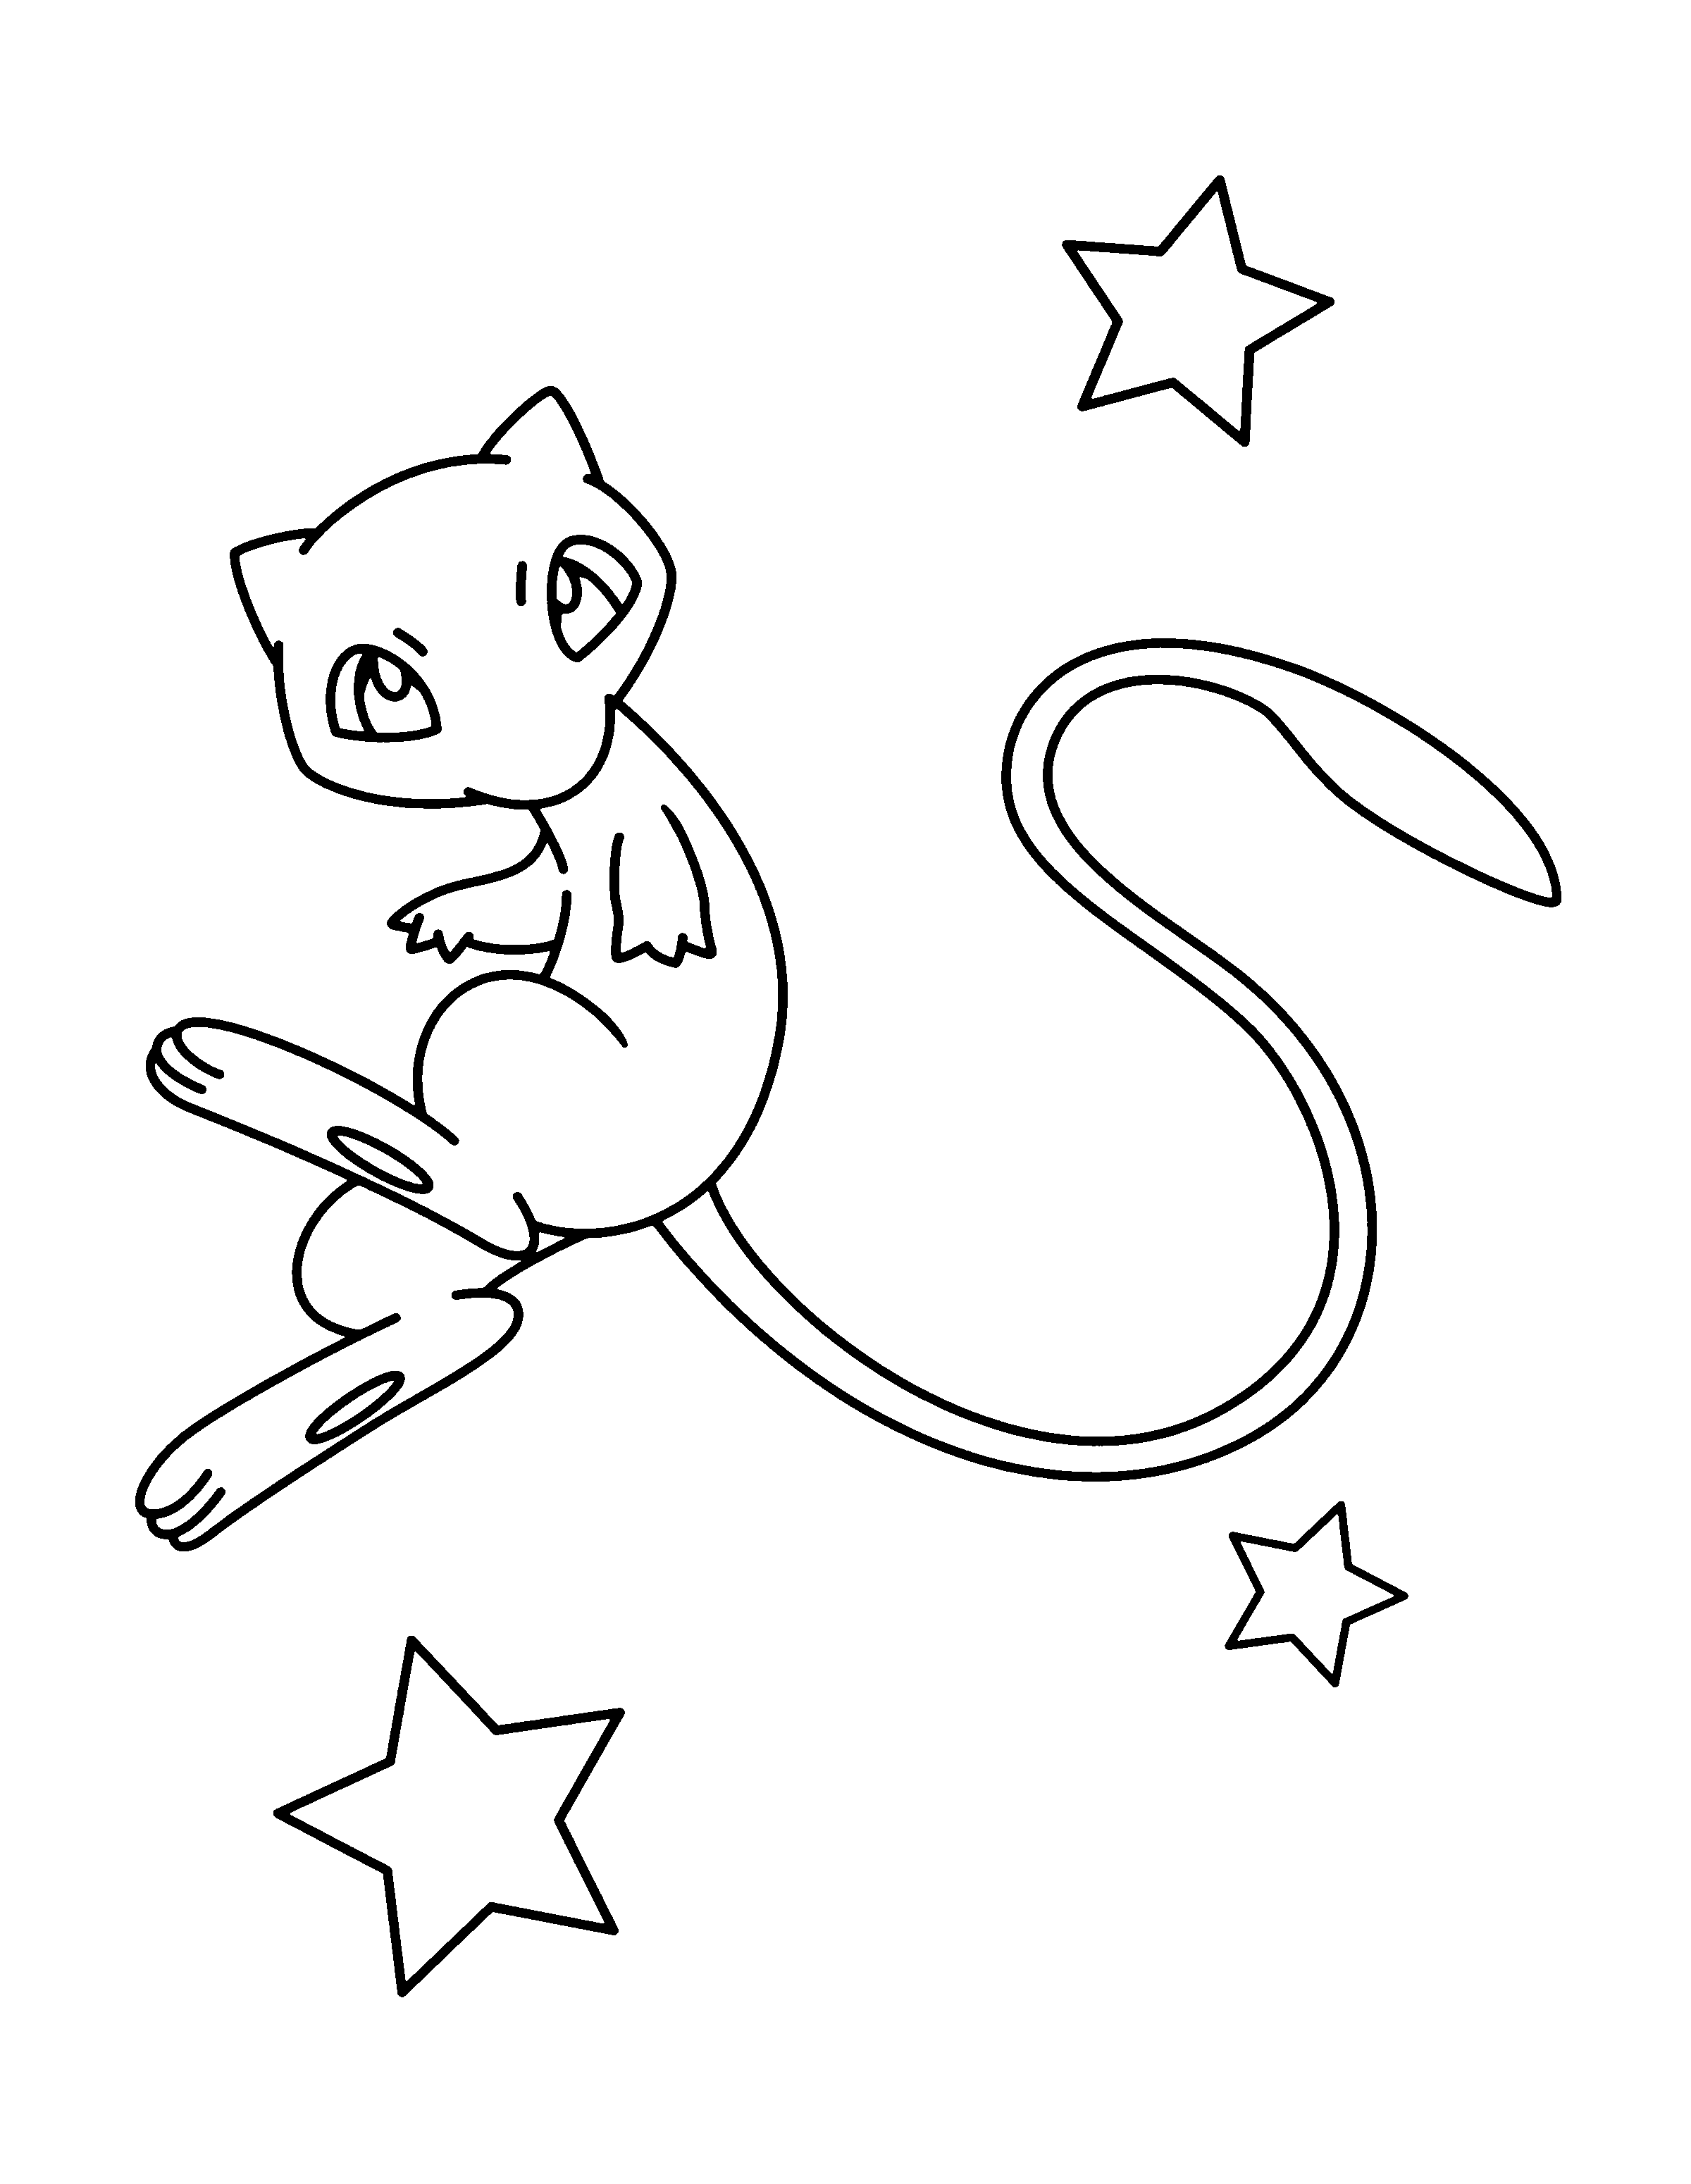 Coloring Page Pokemon Advanced Coloring Pages 0 Pokemon Coloring Pages Coloring Pages